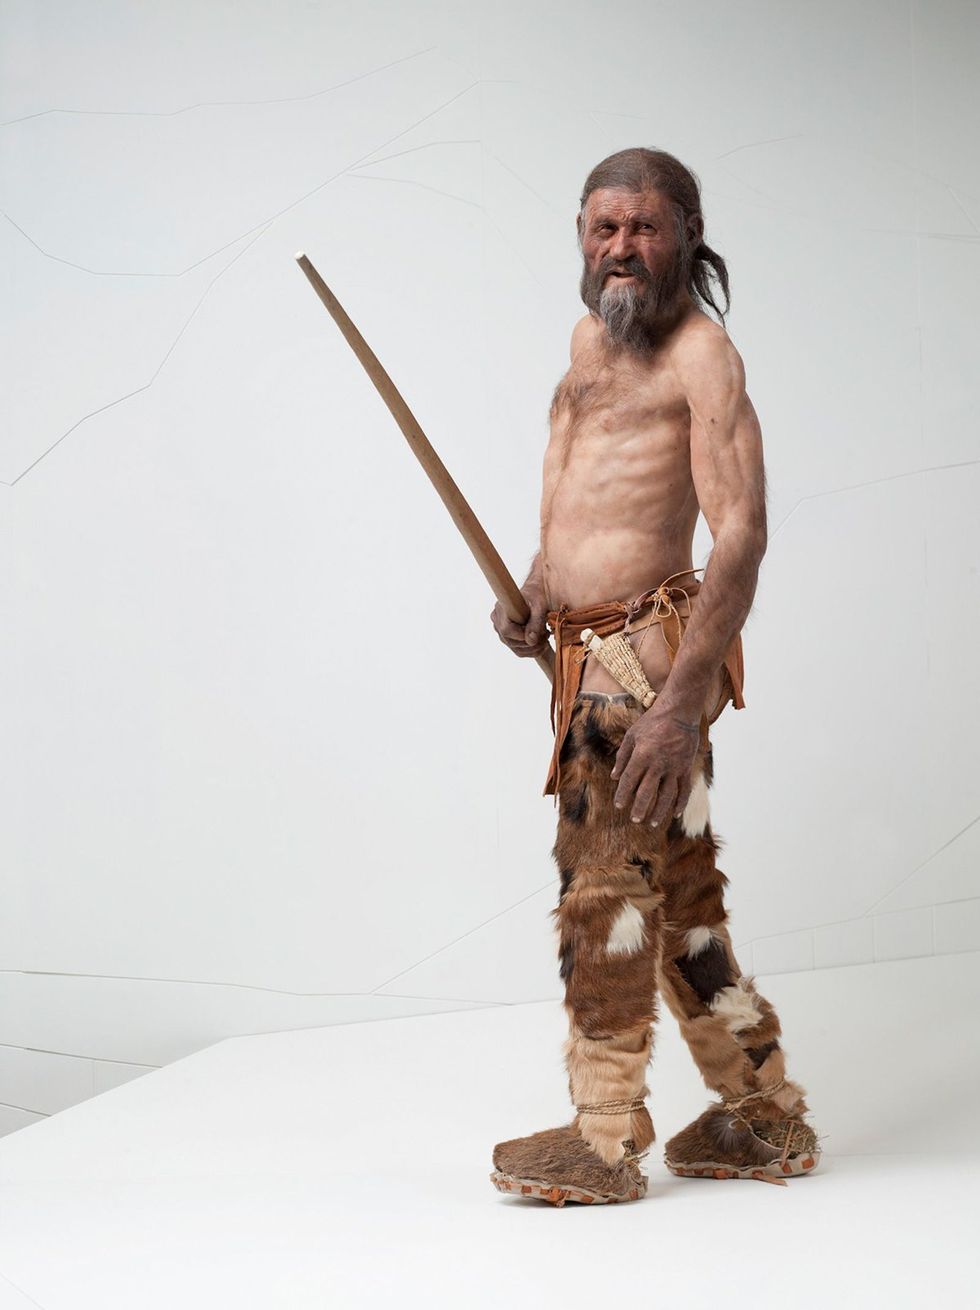 A very sexy new \u00d6tzi the Iceman on display at the South Tyrol Museum of Archaeology in Italy.